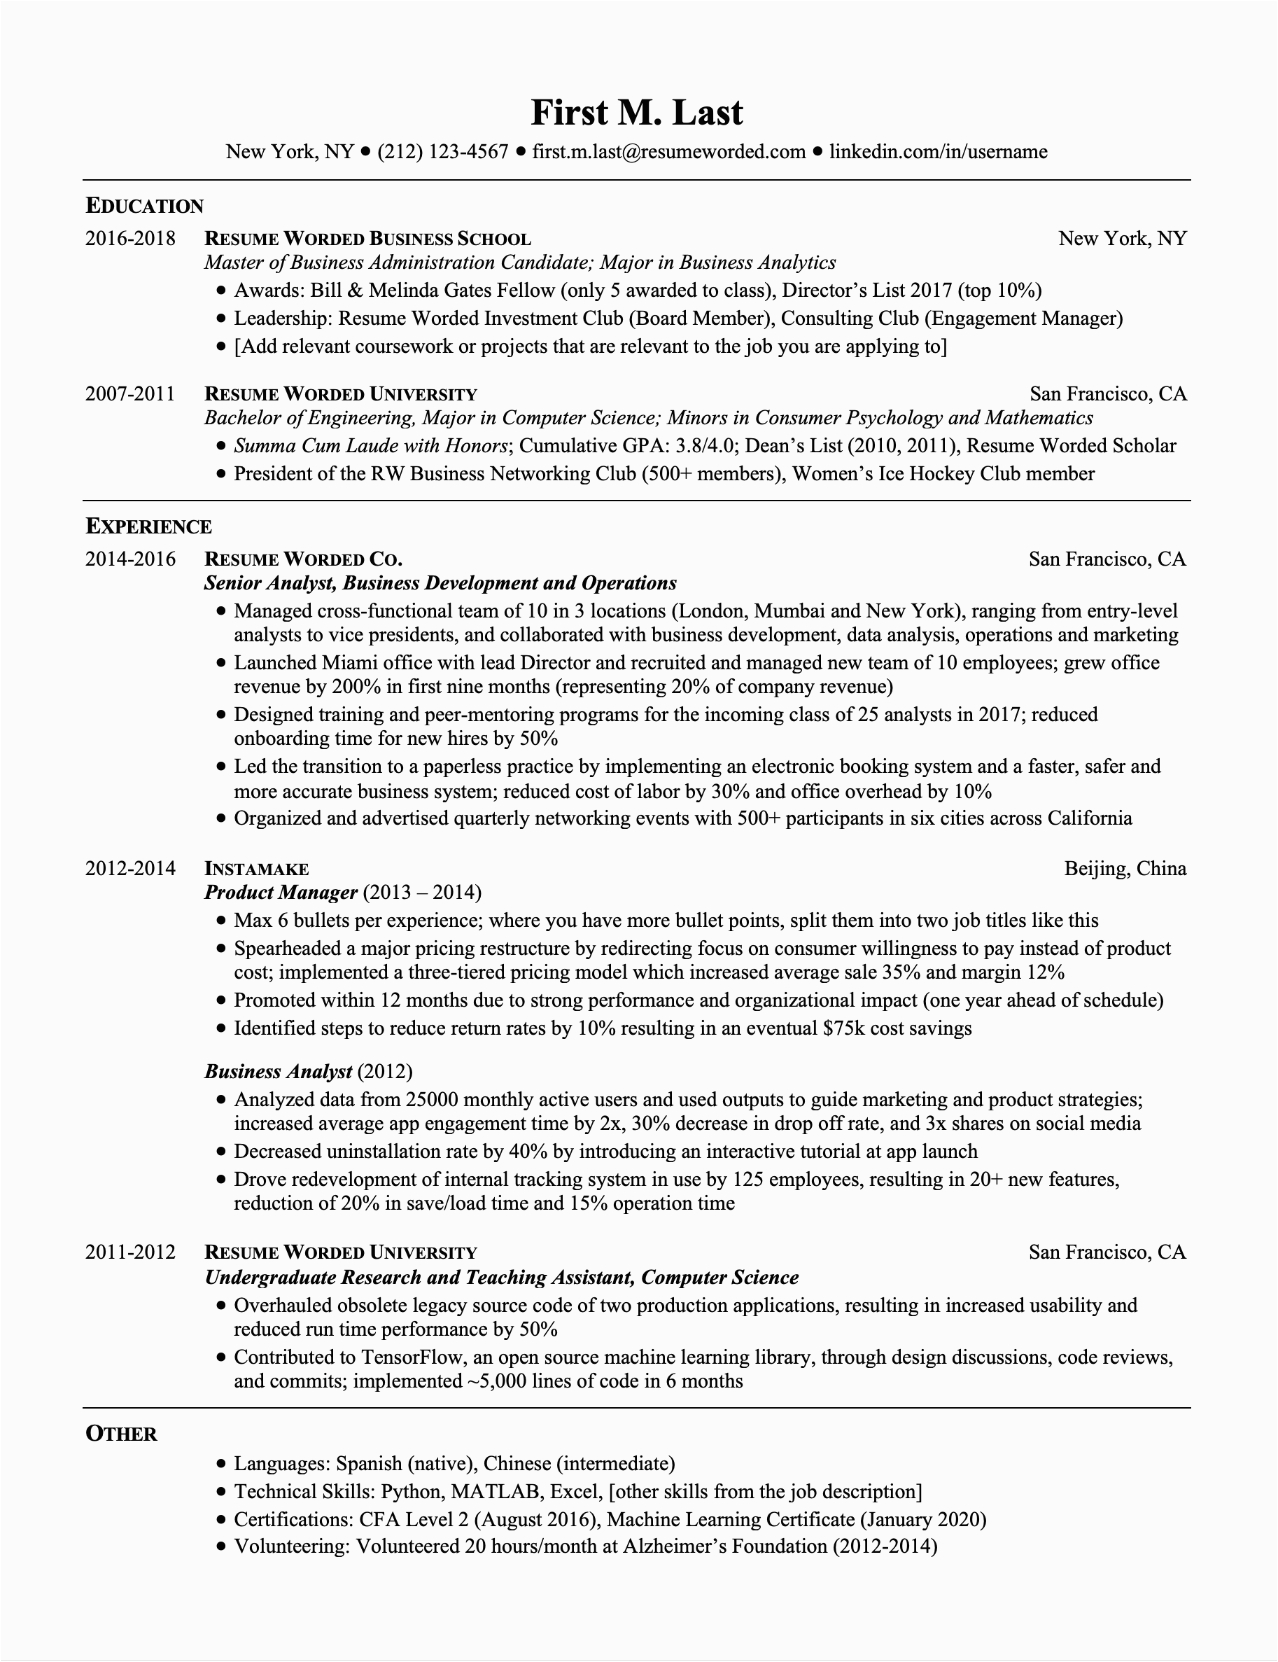 Resume Template for Multiple Positions at Same Company Resume format Multiple Positions In Same Pany